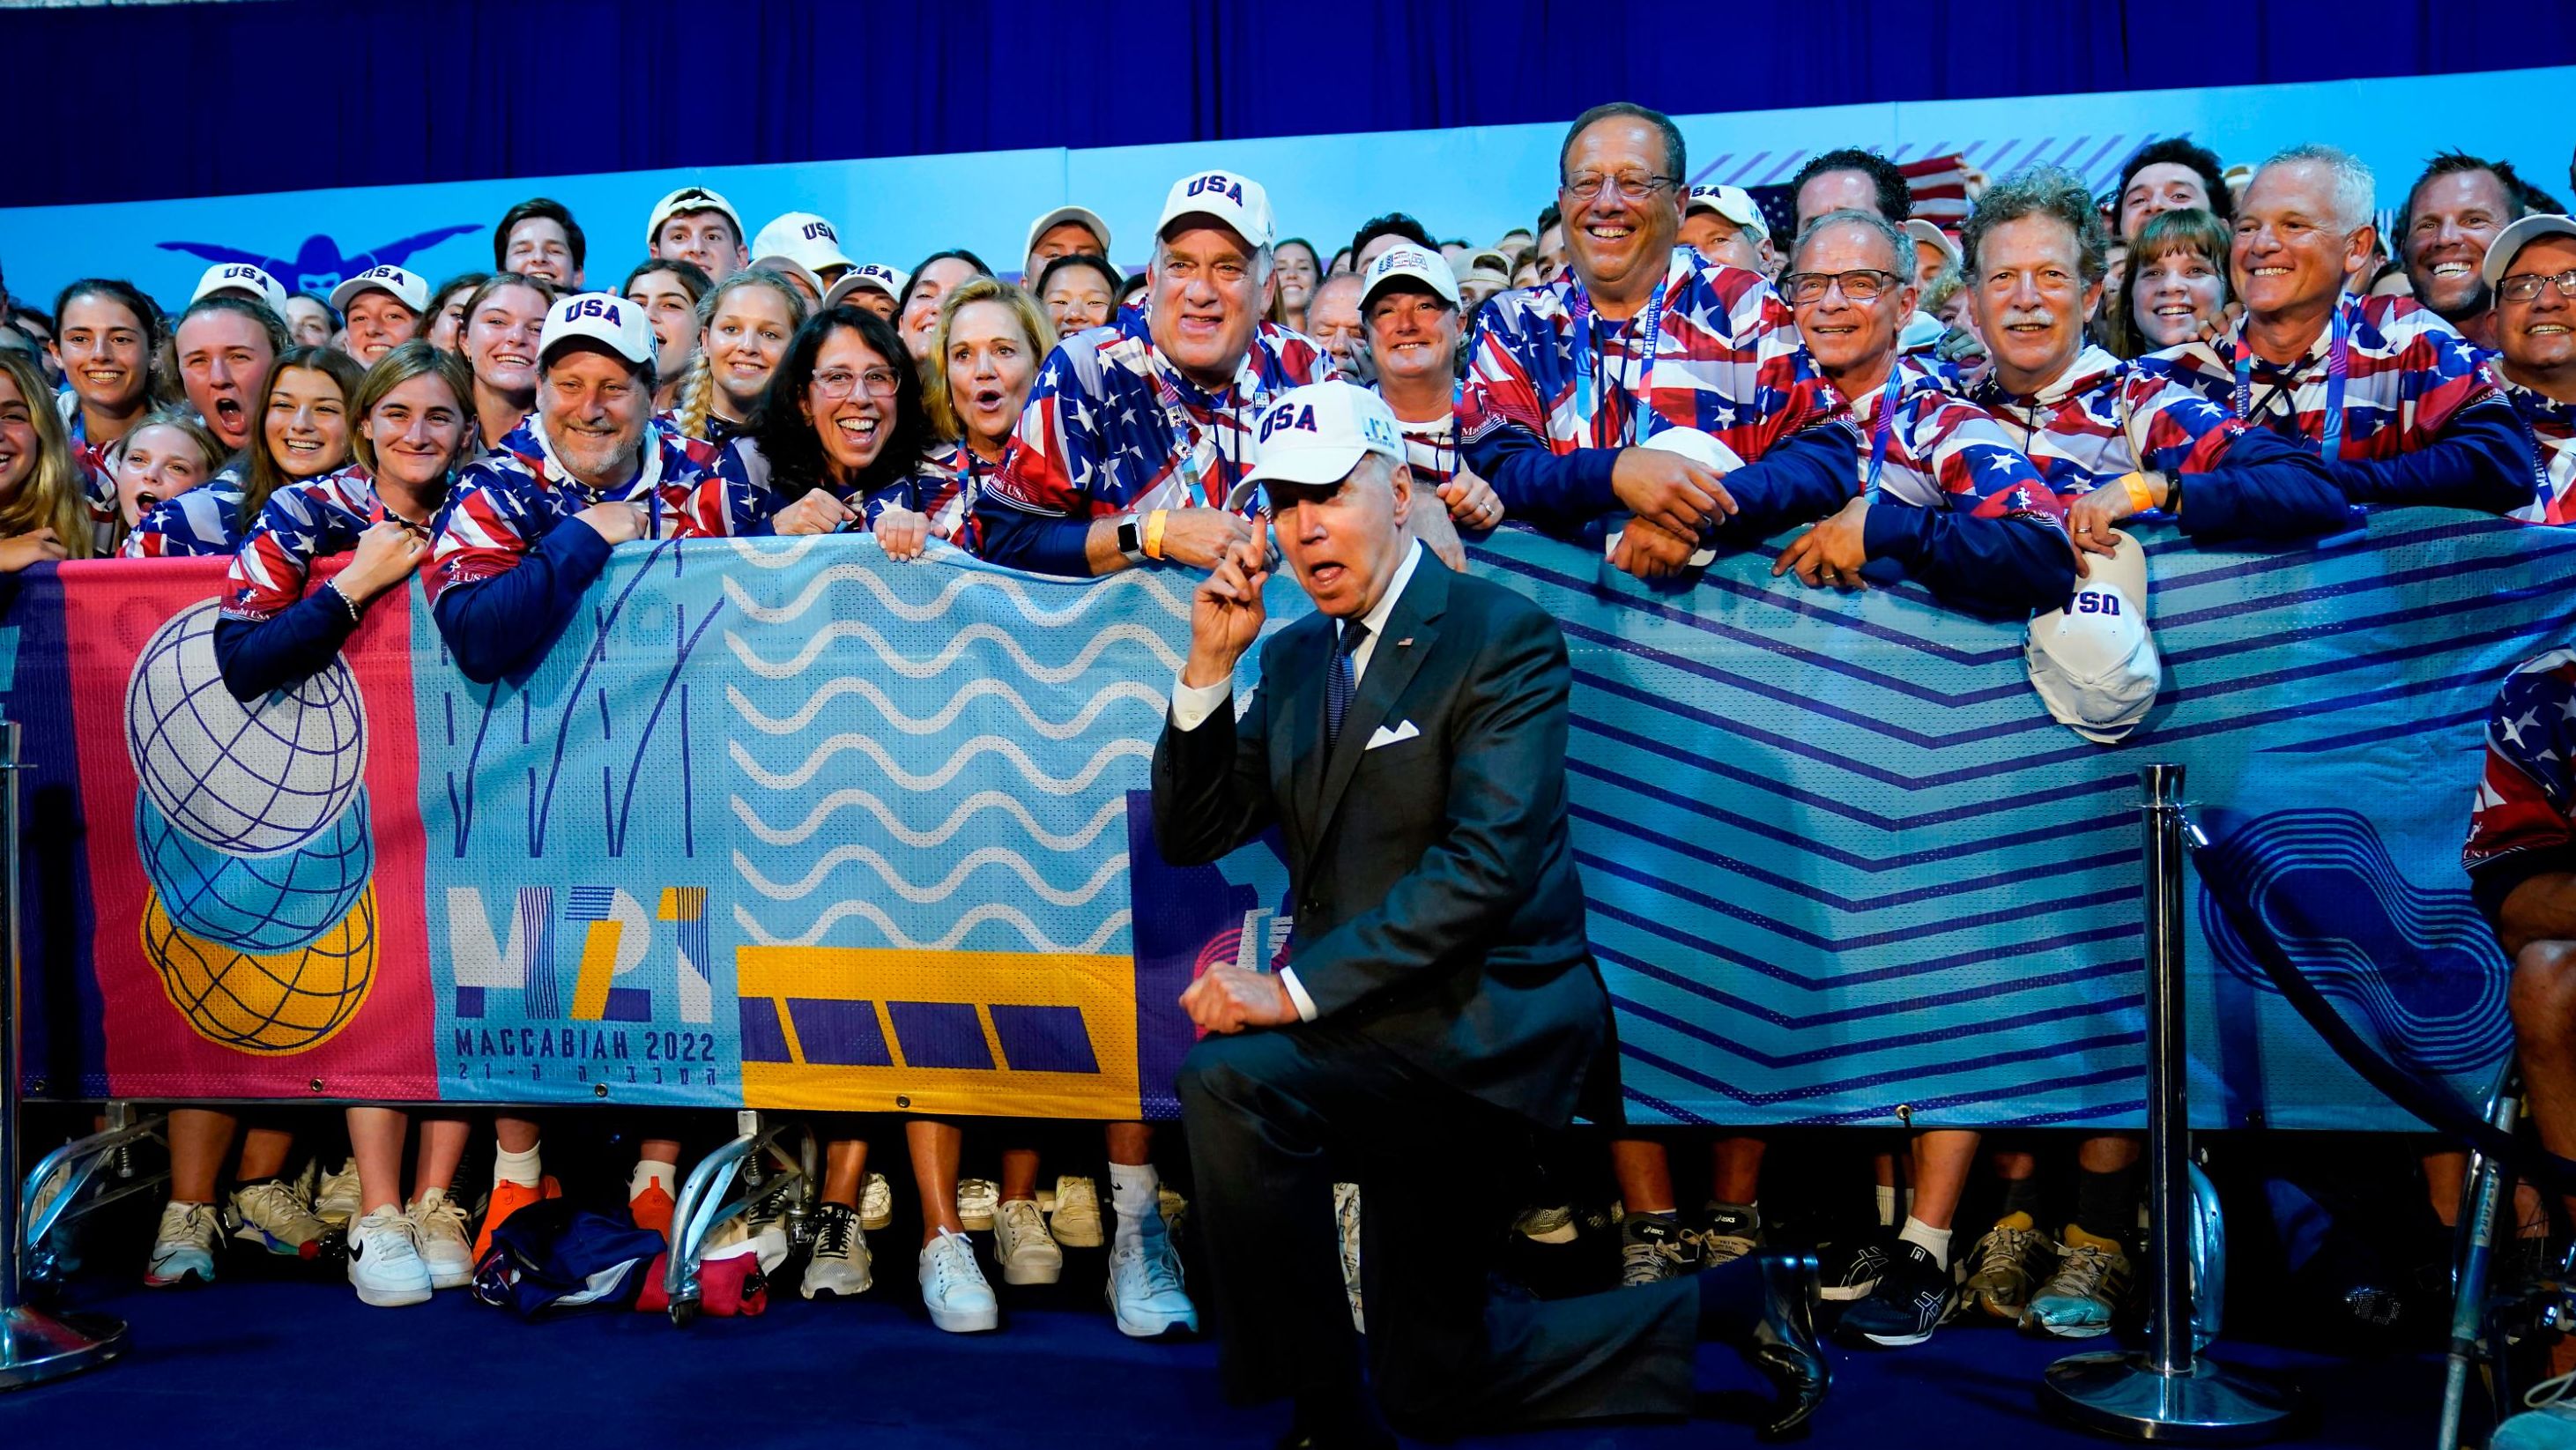 Biden points to his USA hat as he meets with US athletes competing in the Maccabiah Games, an international Jewish and Israeli multi-sport event, on Thursday. Biden also watched a portion of the opening ceremonies.